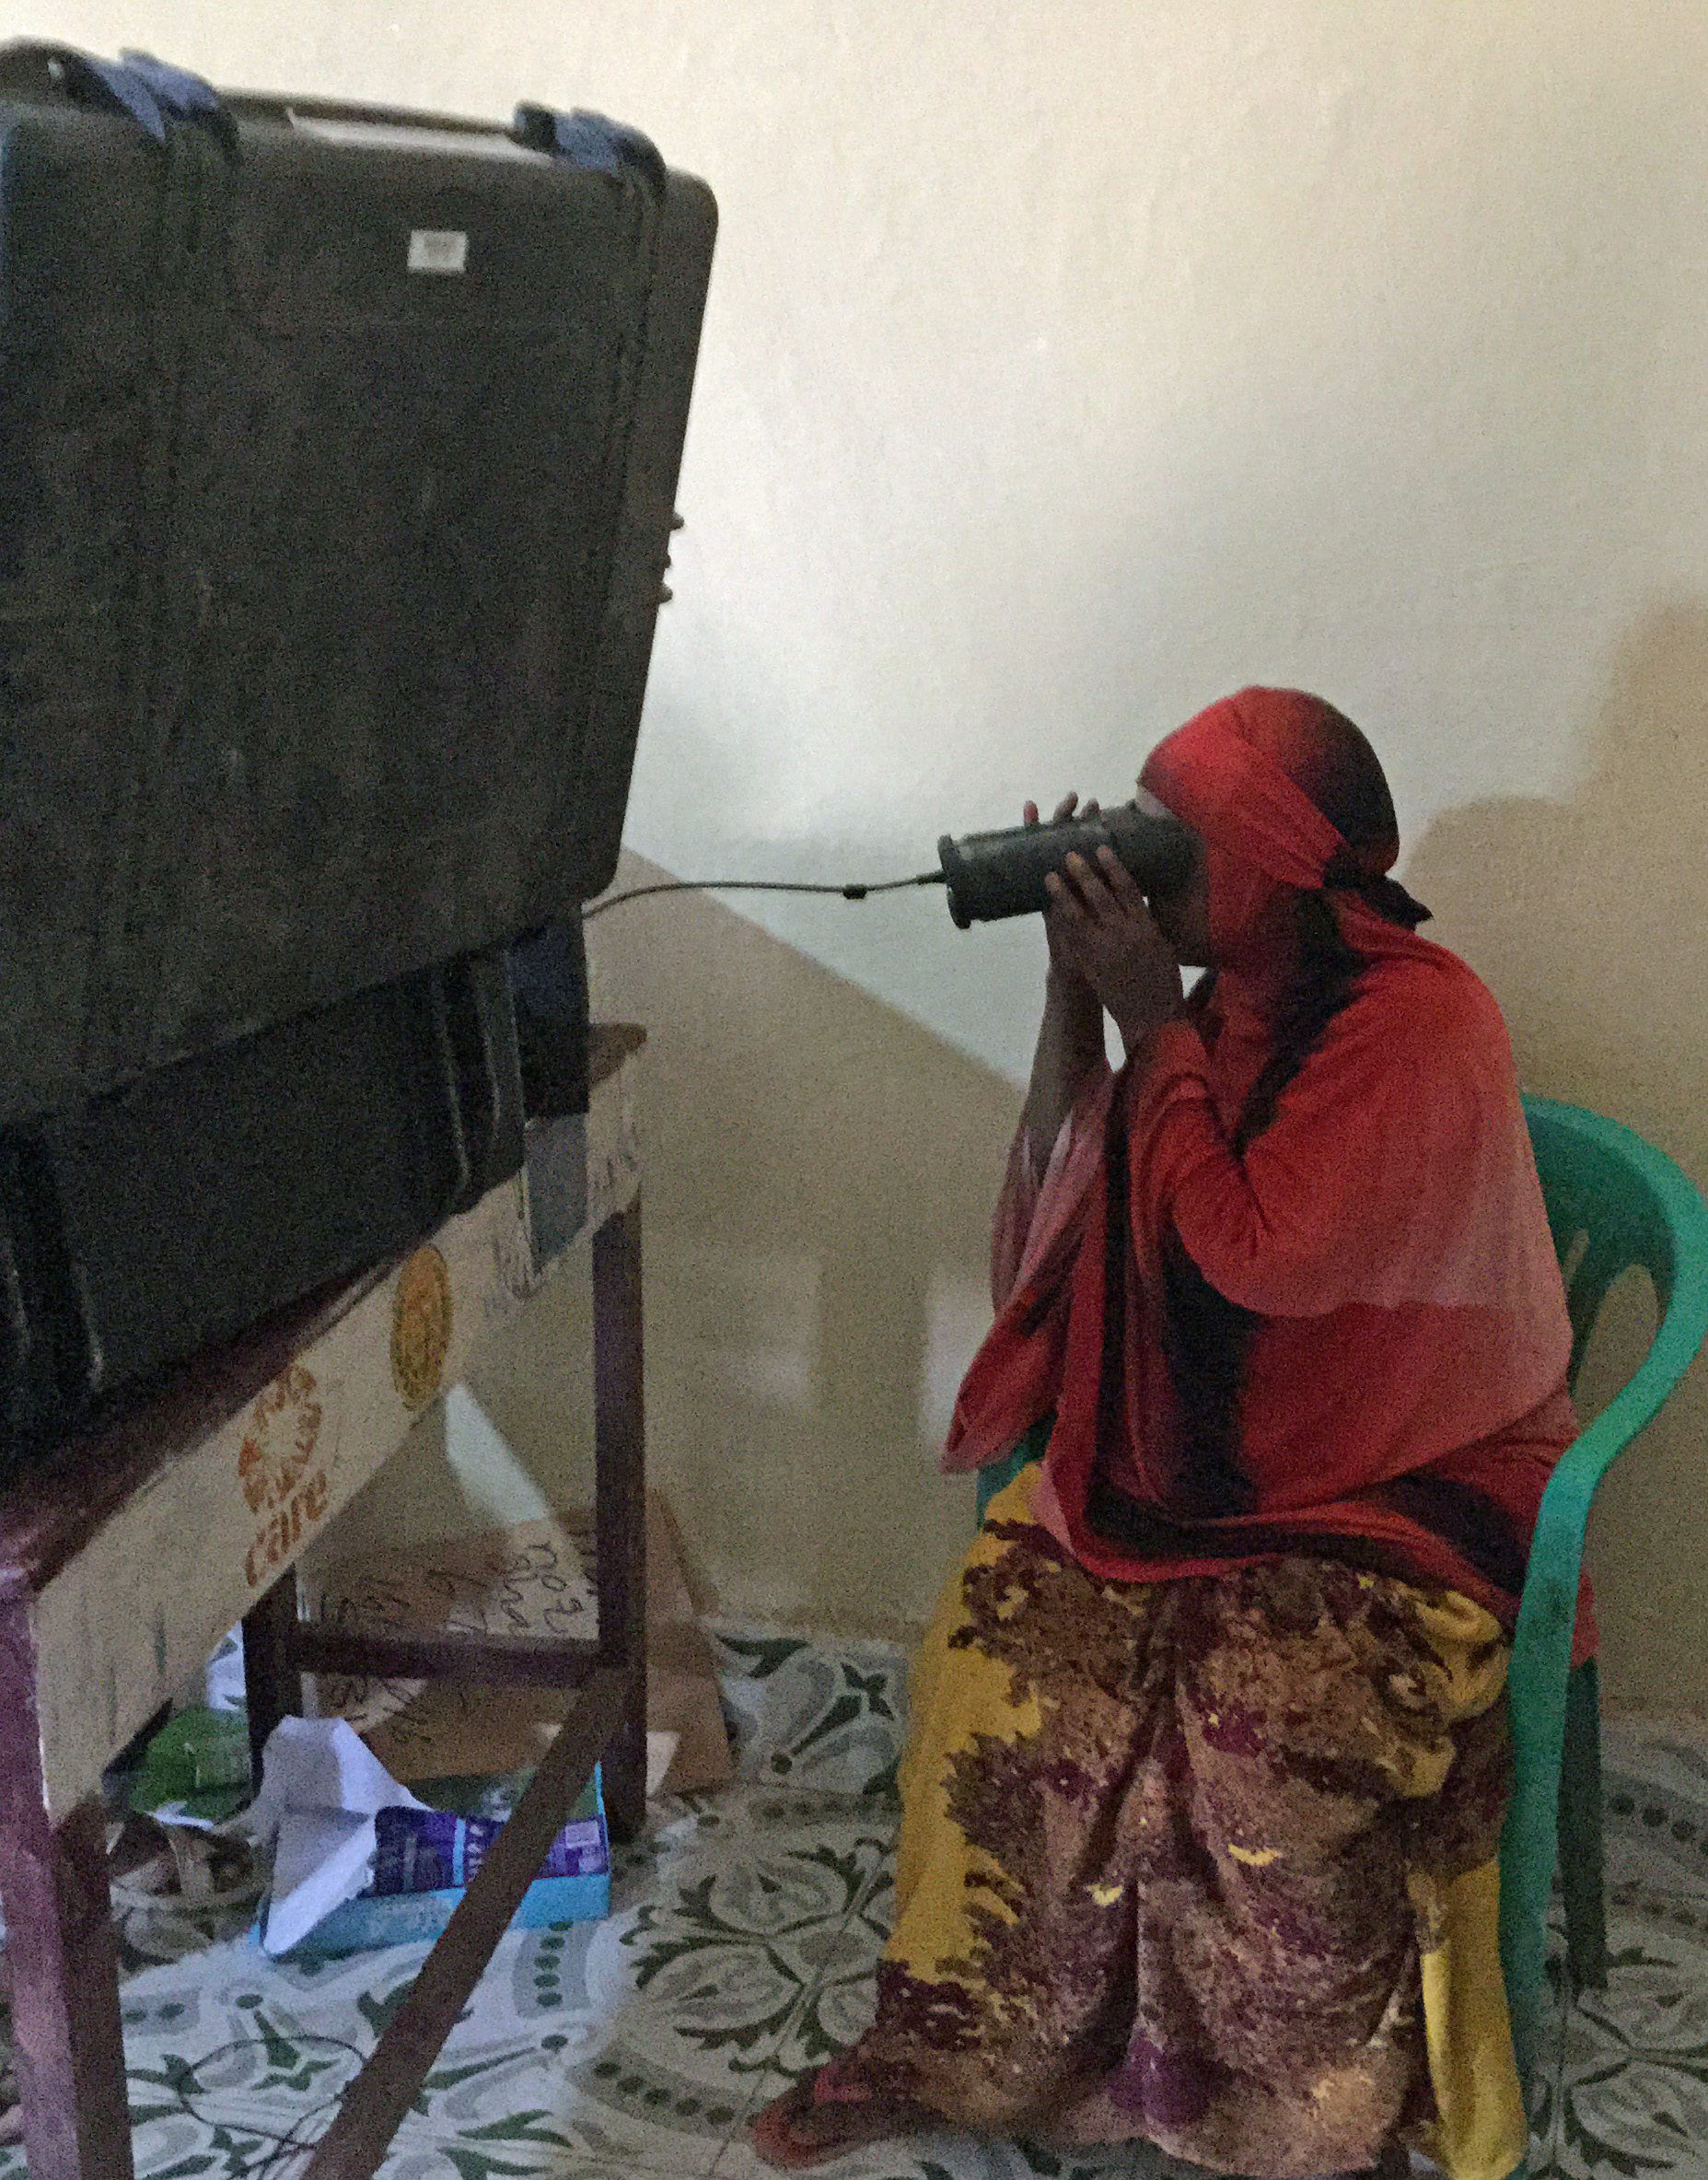 A female voter uses new iris-recognition technology 